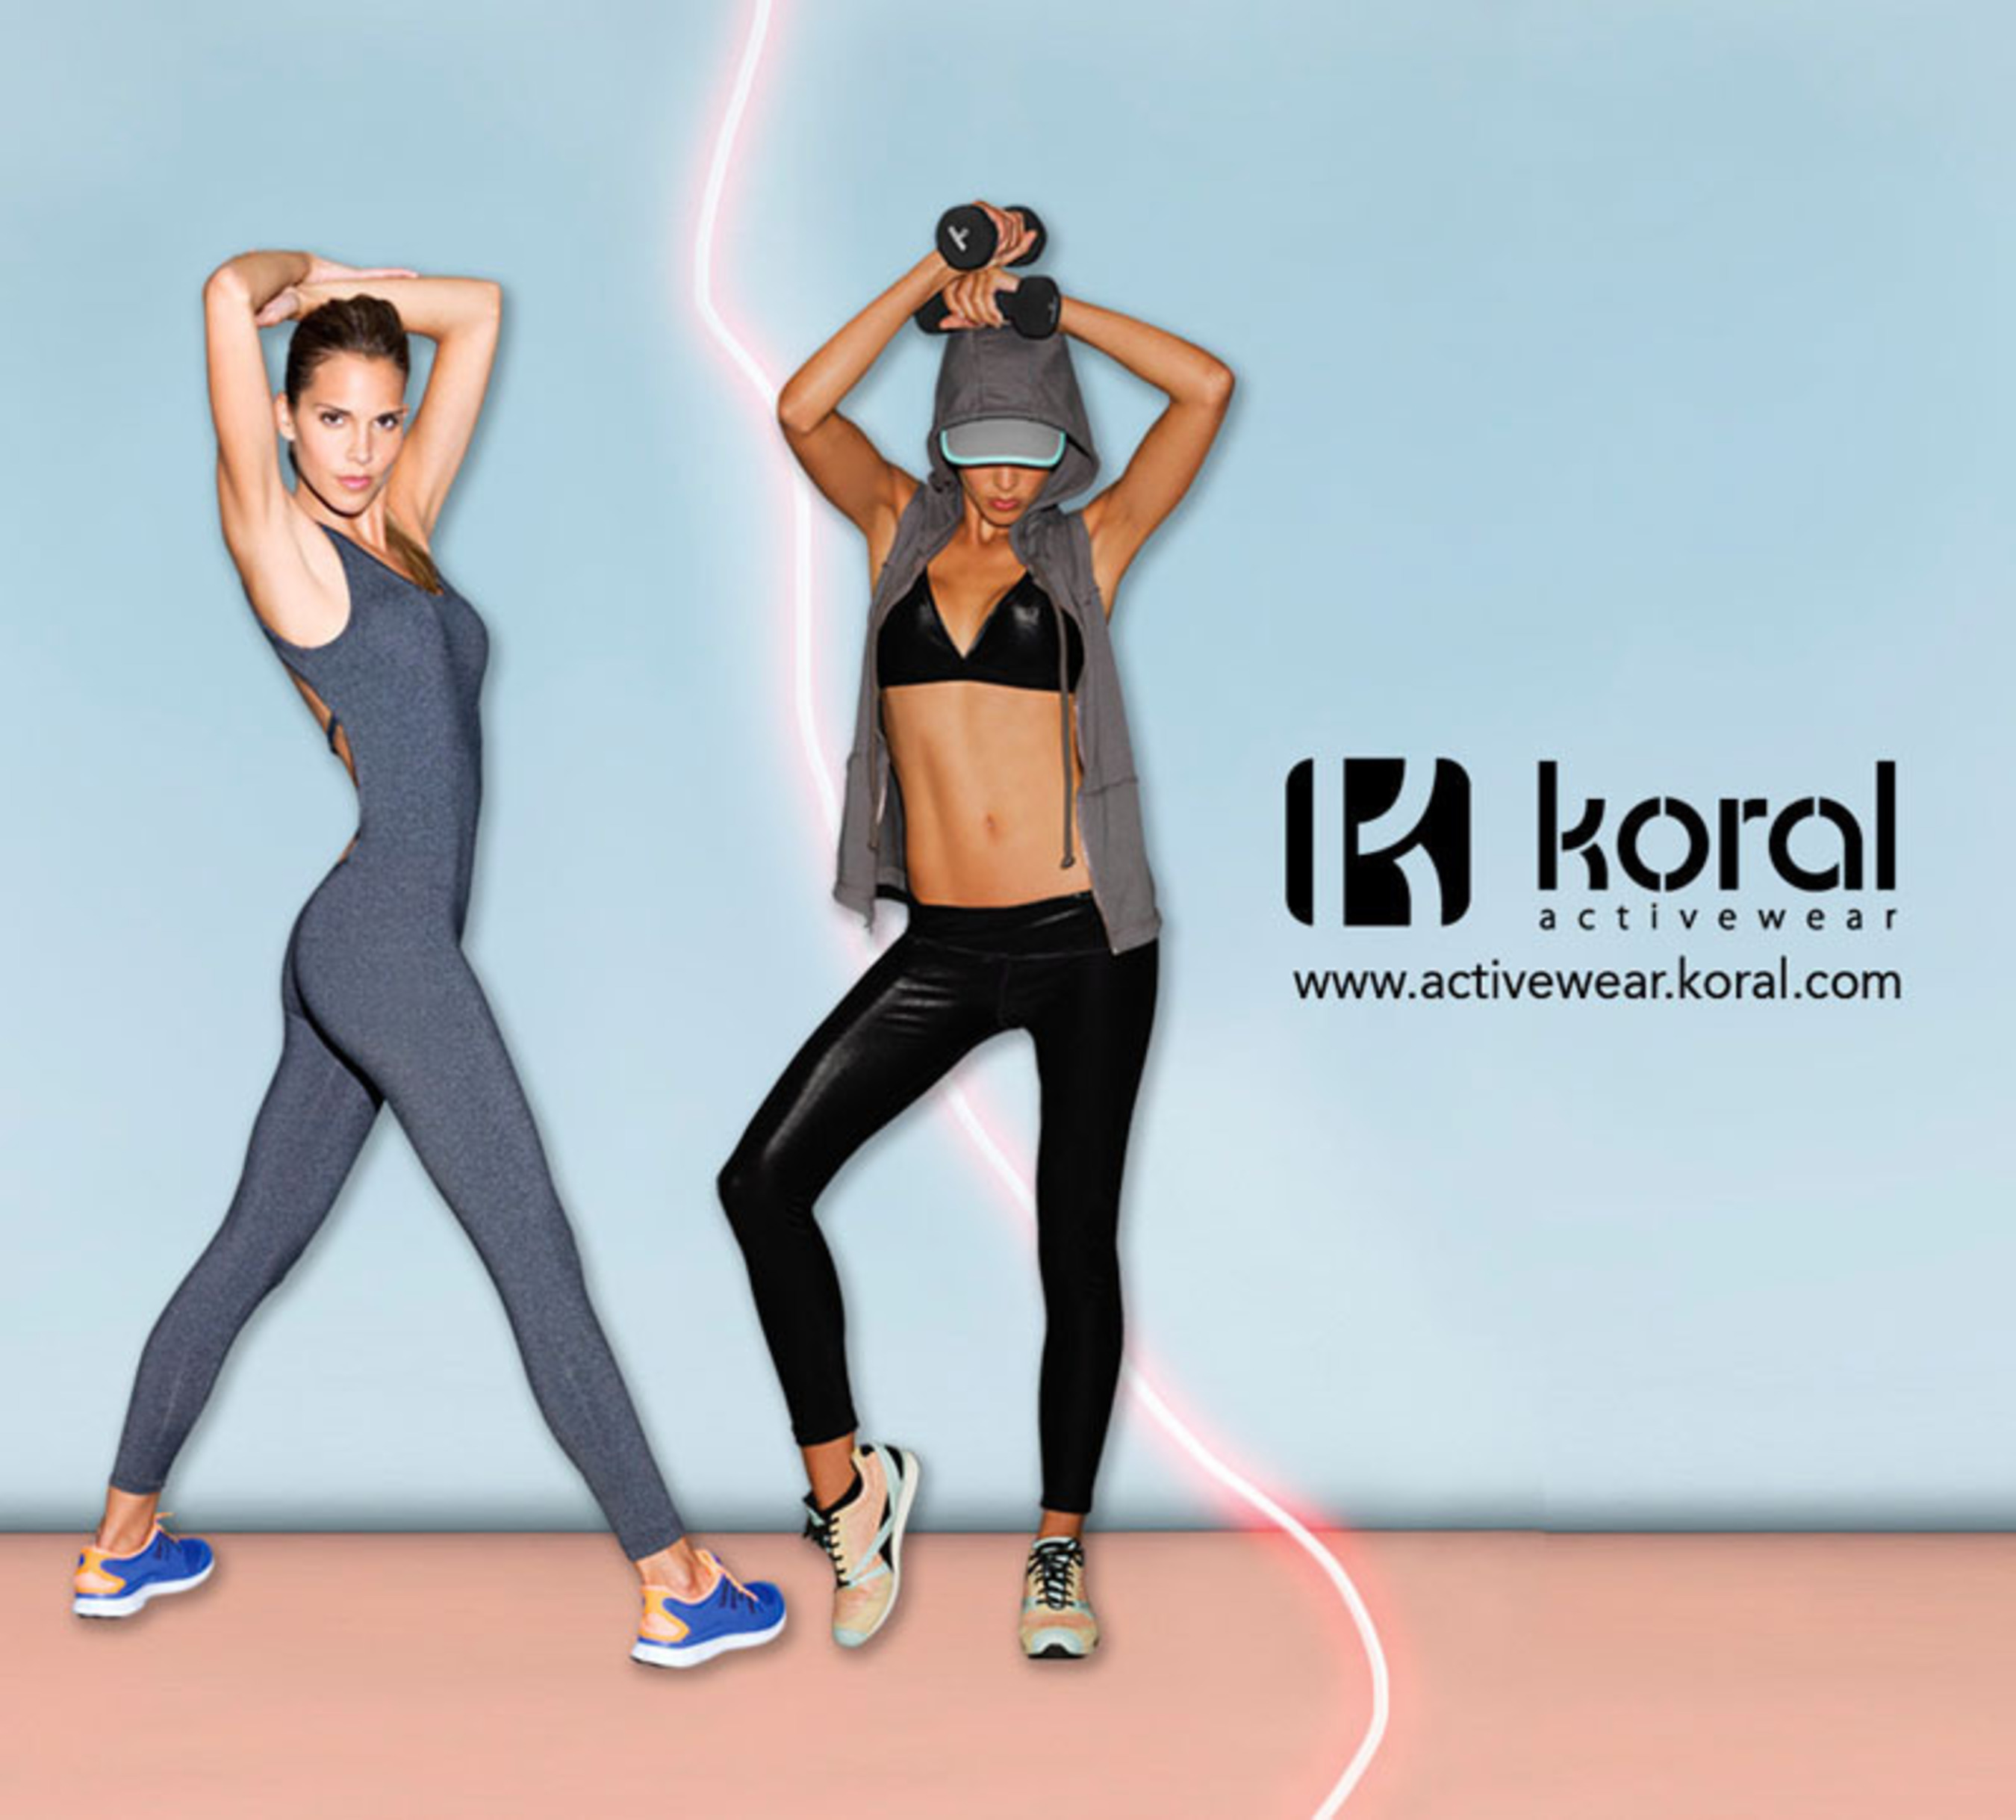 Urban Outfitters - Koral Activewear  Athletic fashion, Koral activewear,  Fashion layout